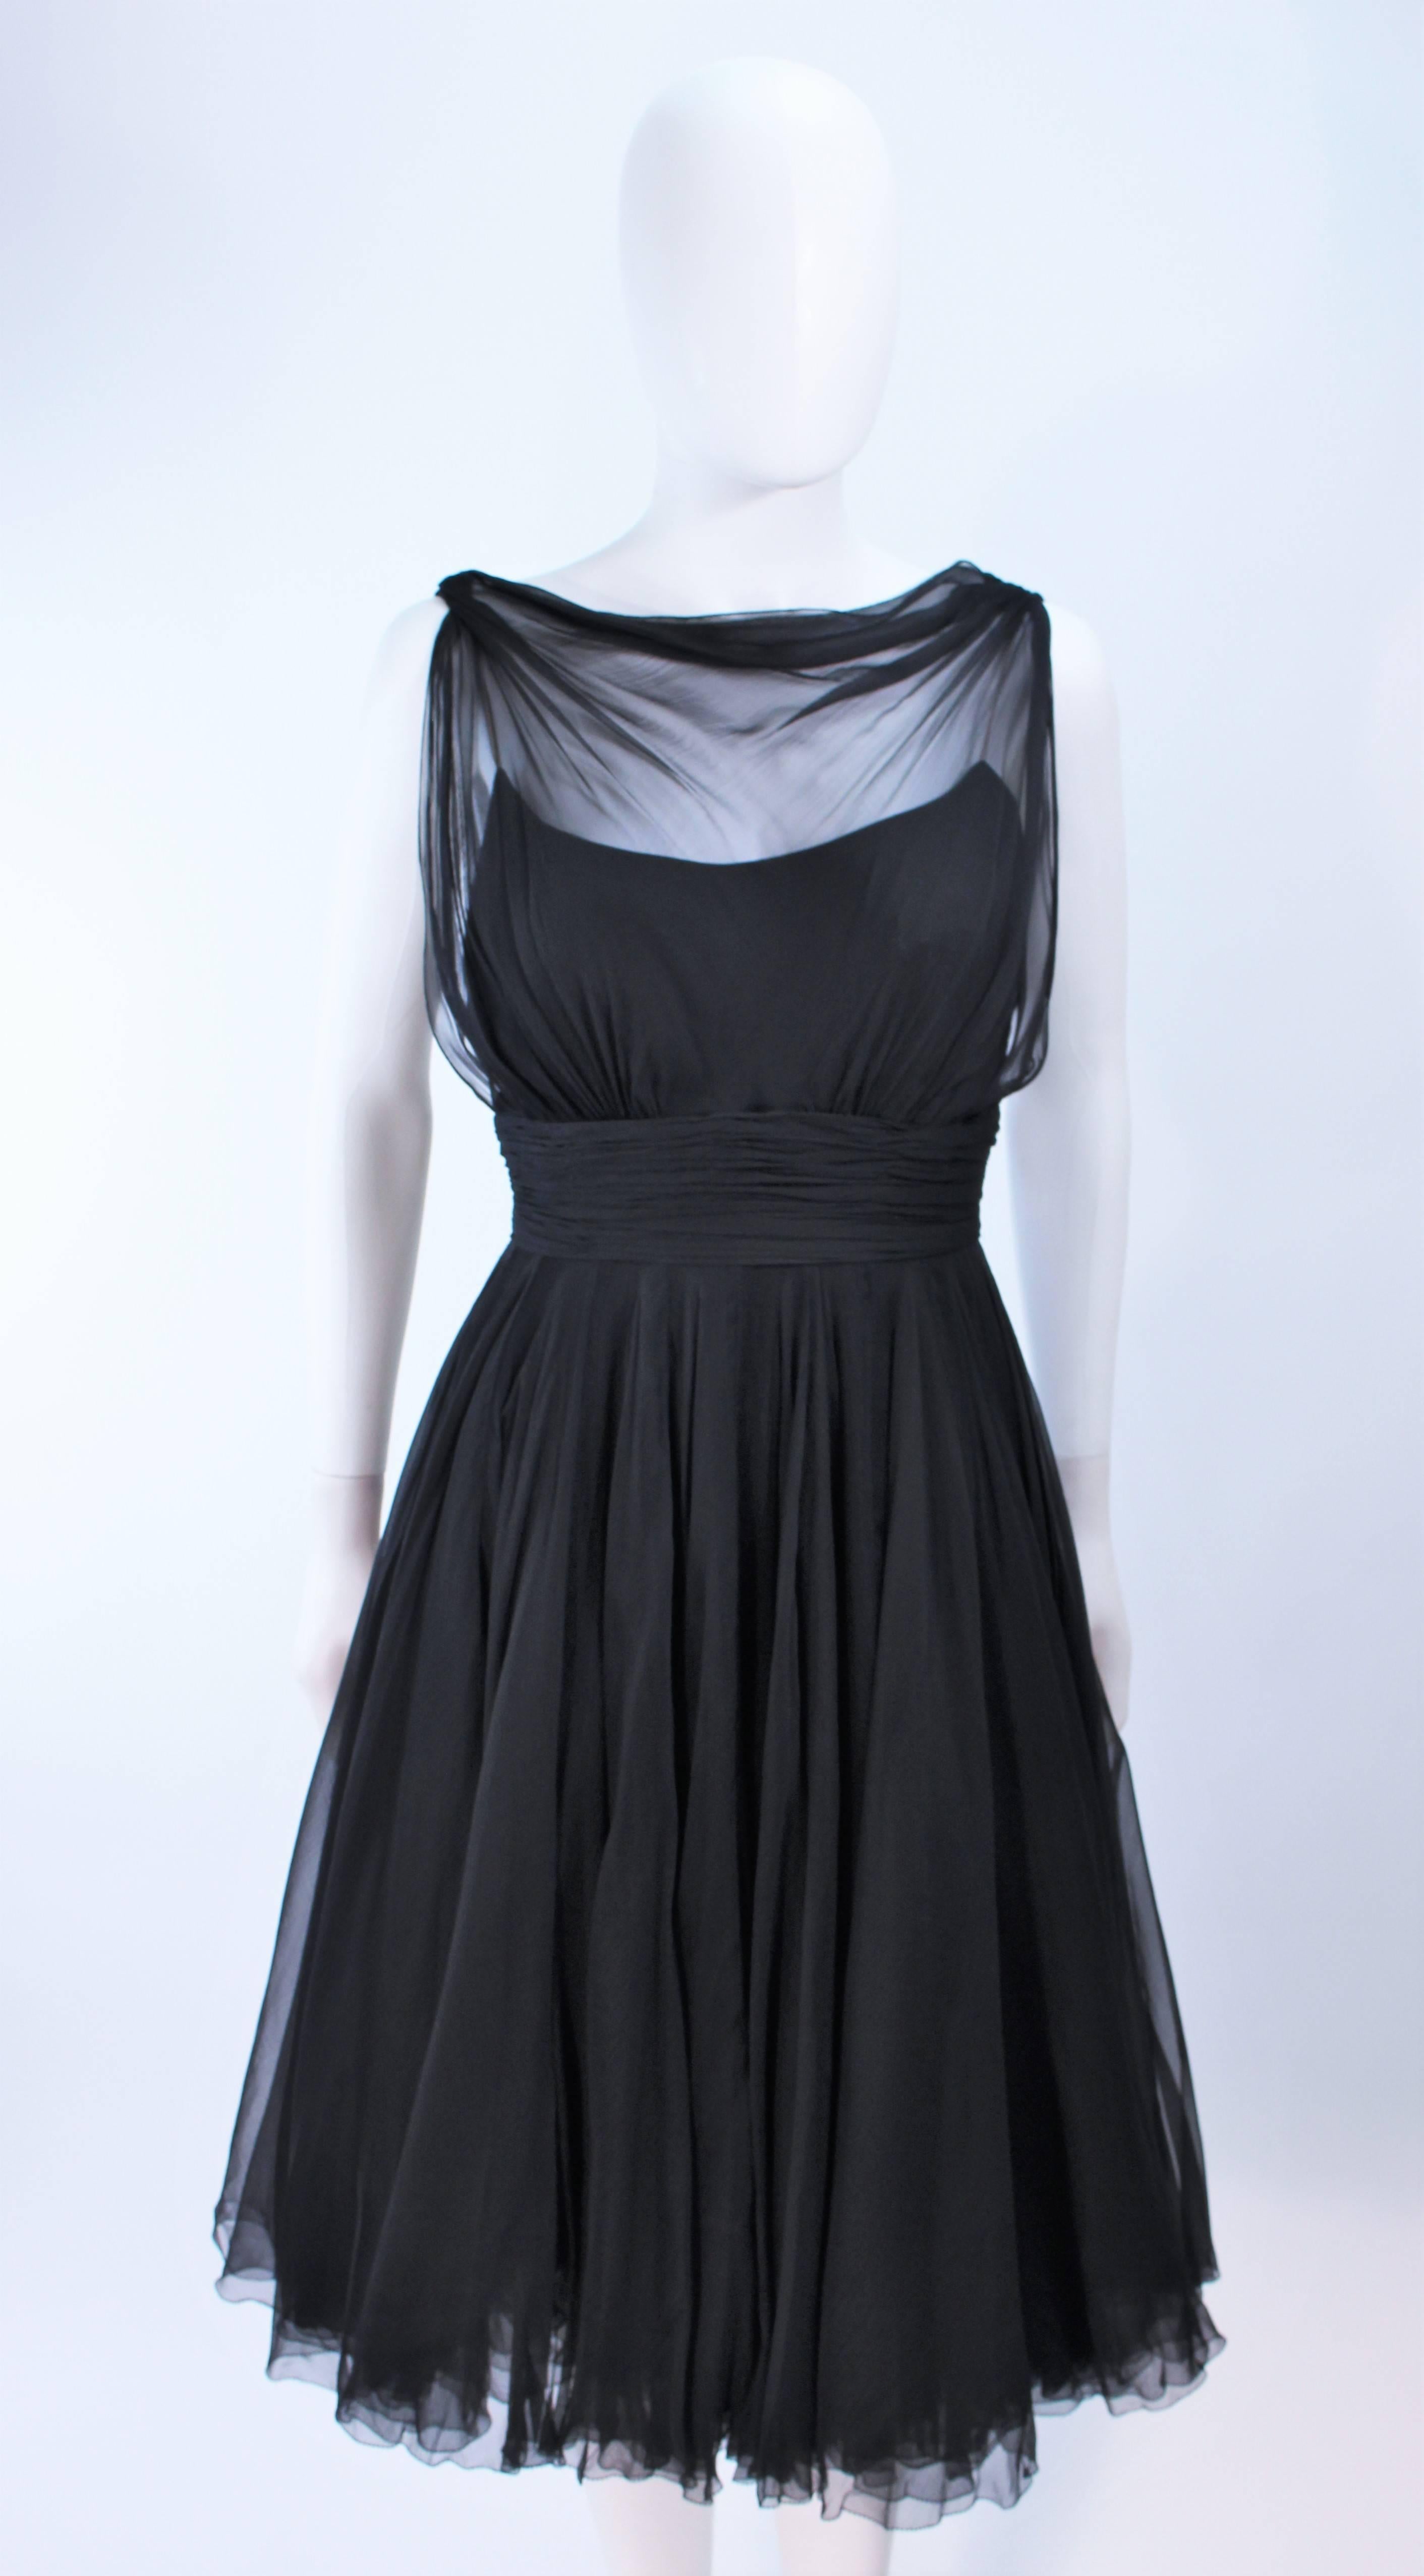 GALANOS Black Silk Chiffon Draped Cocktail Dress Size 2  In Excellent Condition For Sale In Los Angeles, CA